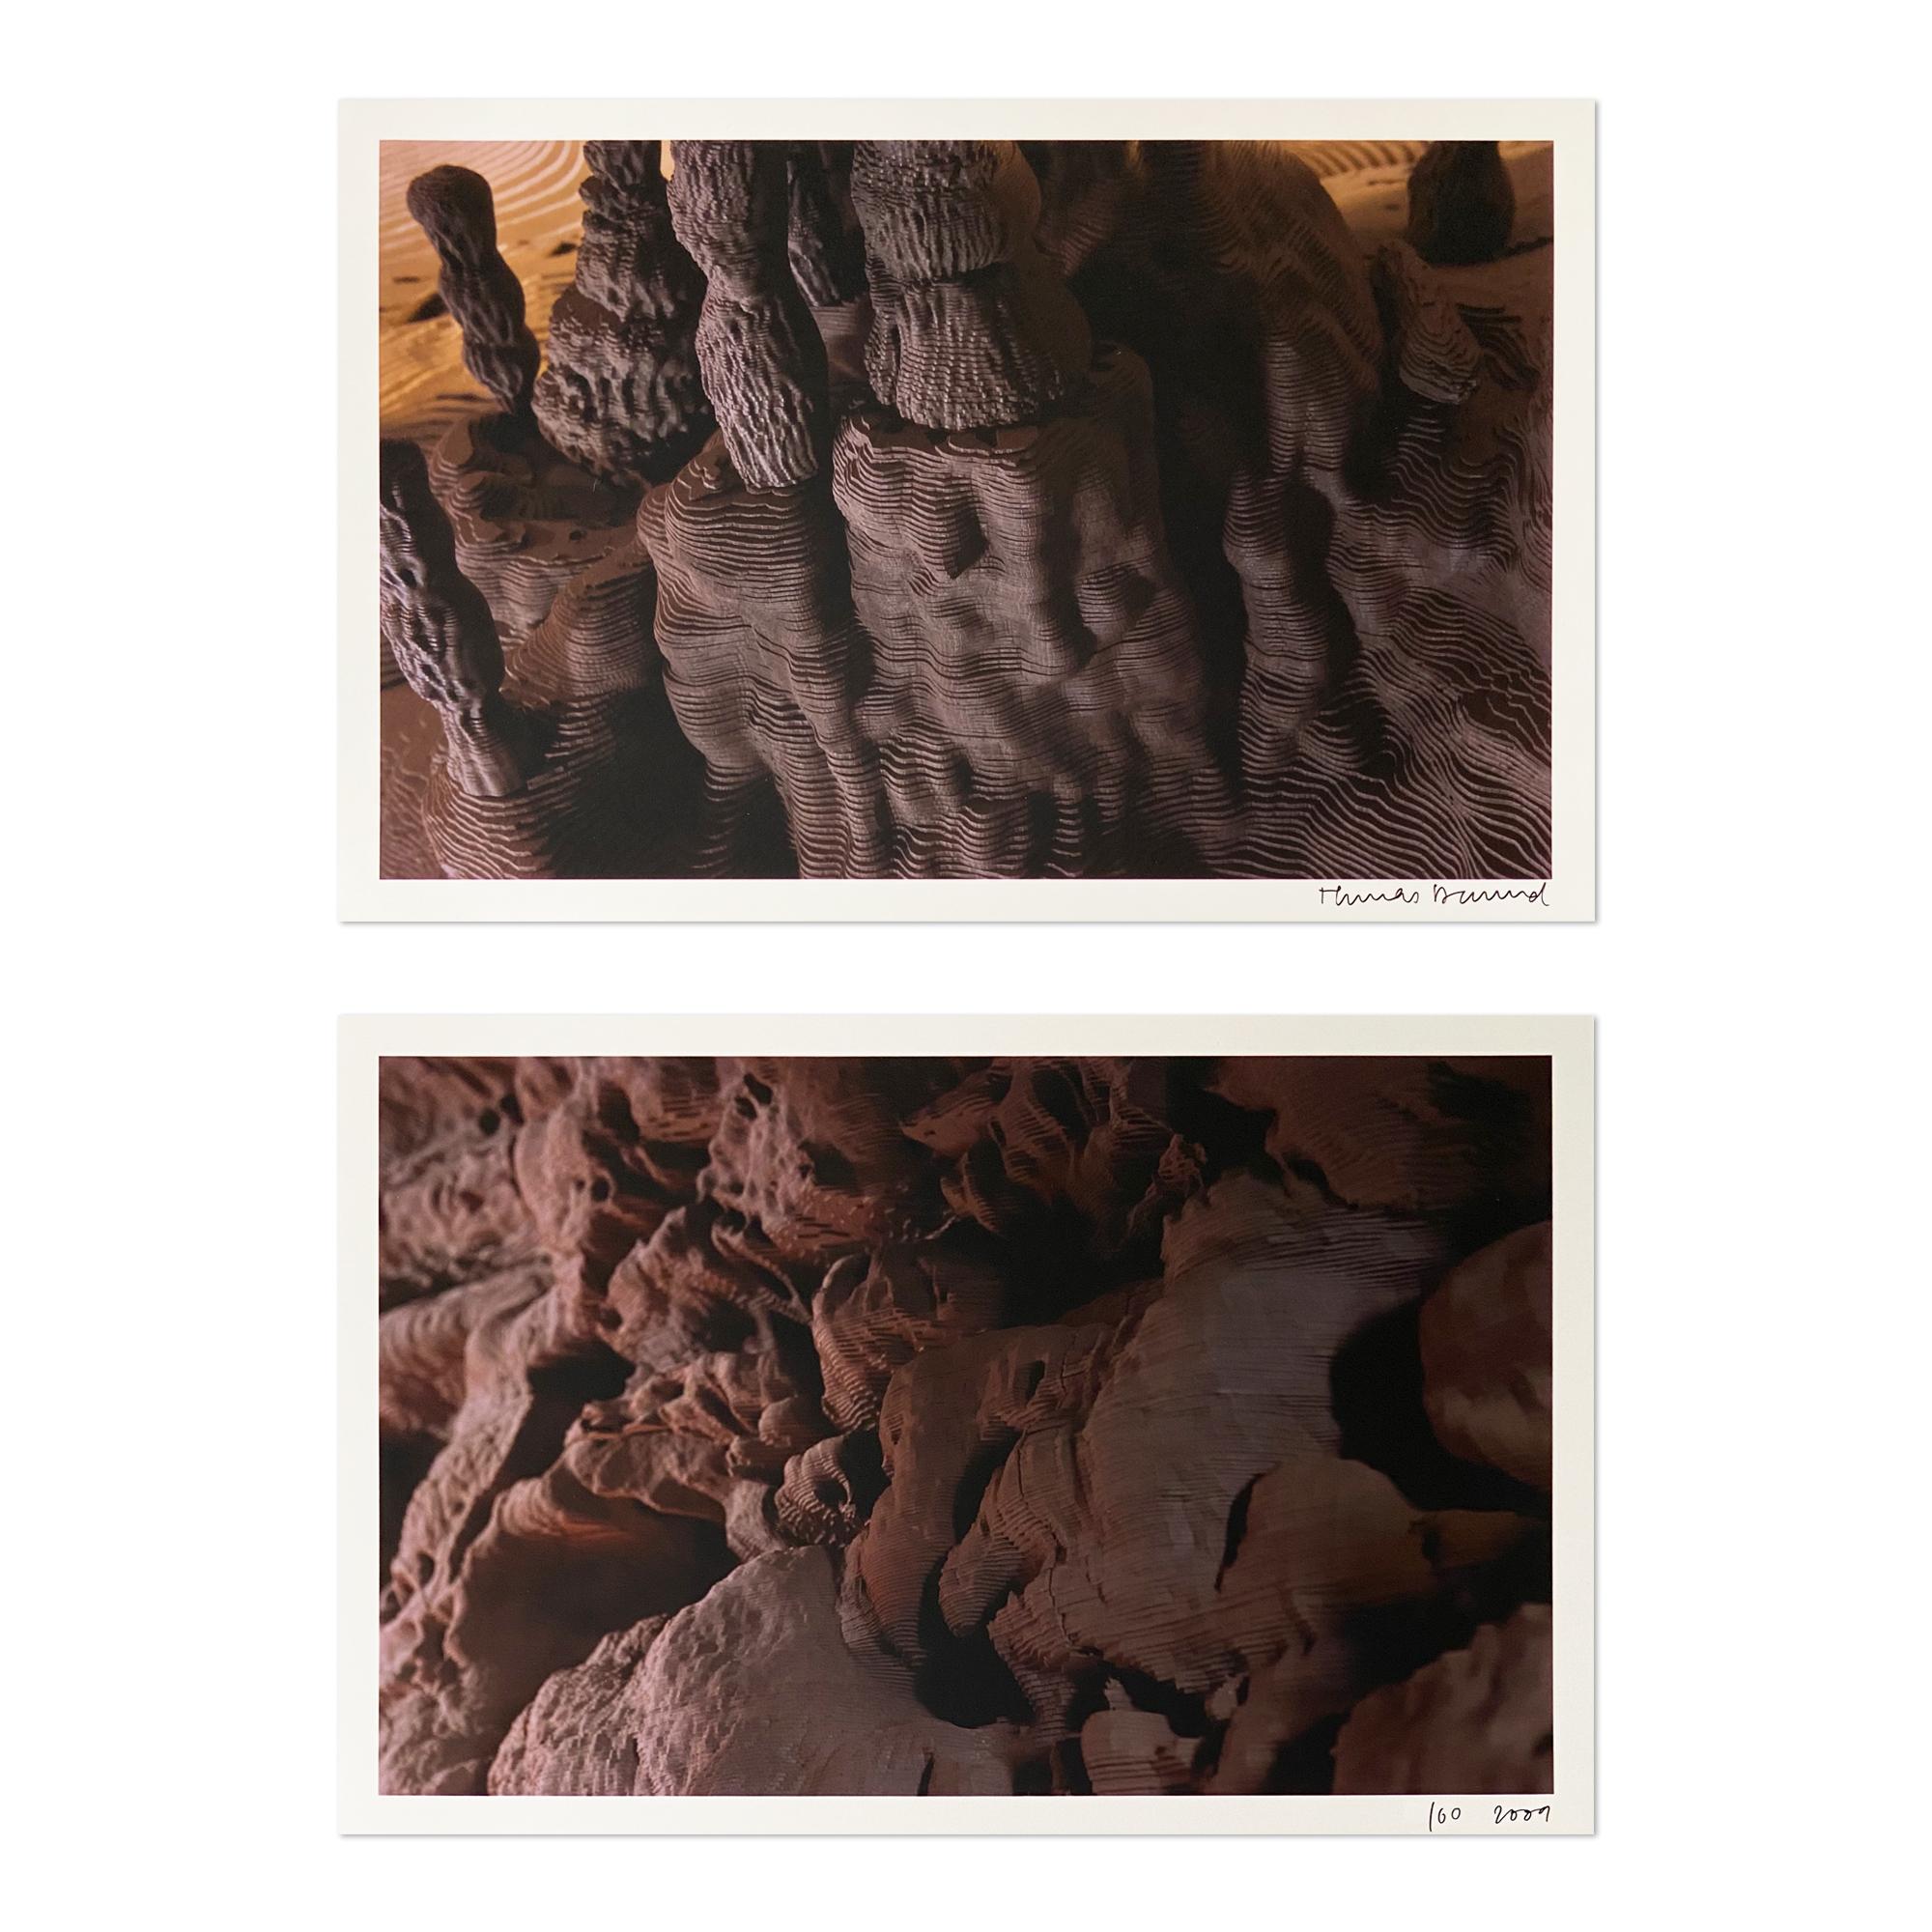 Thomas Demand Abstract Photograph - Grotto (from Catalogue Serpentine Gallery, Collector’s Edition), 2 Photographs